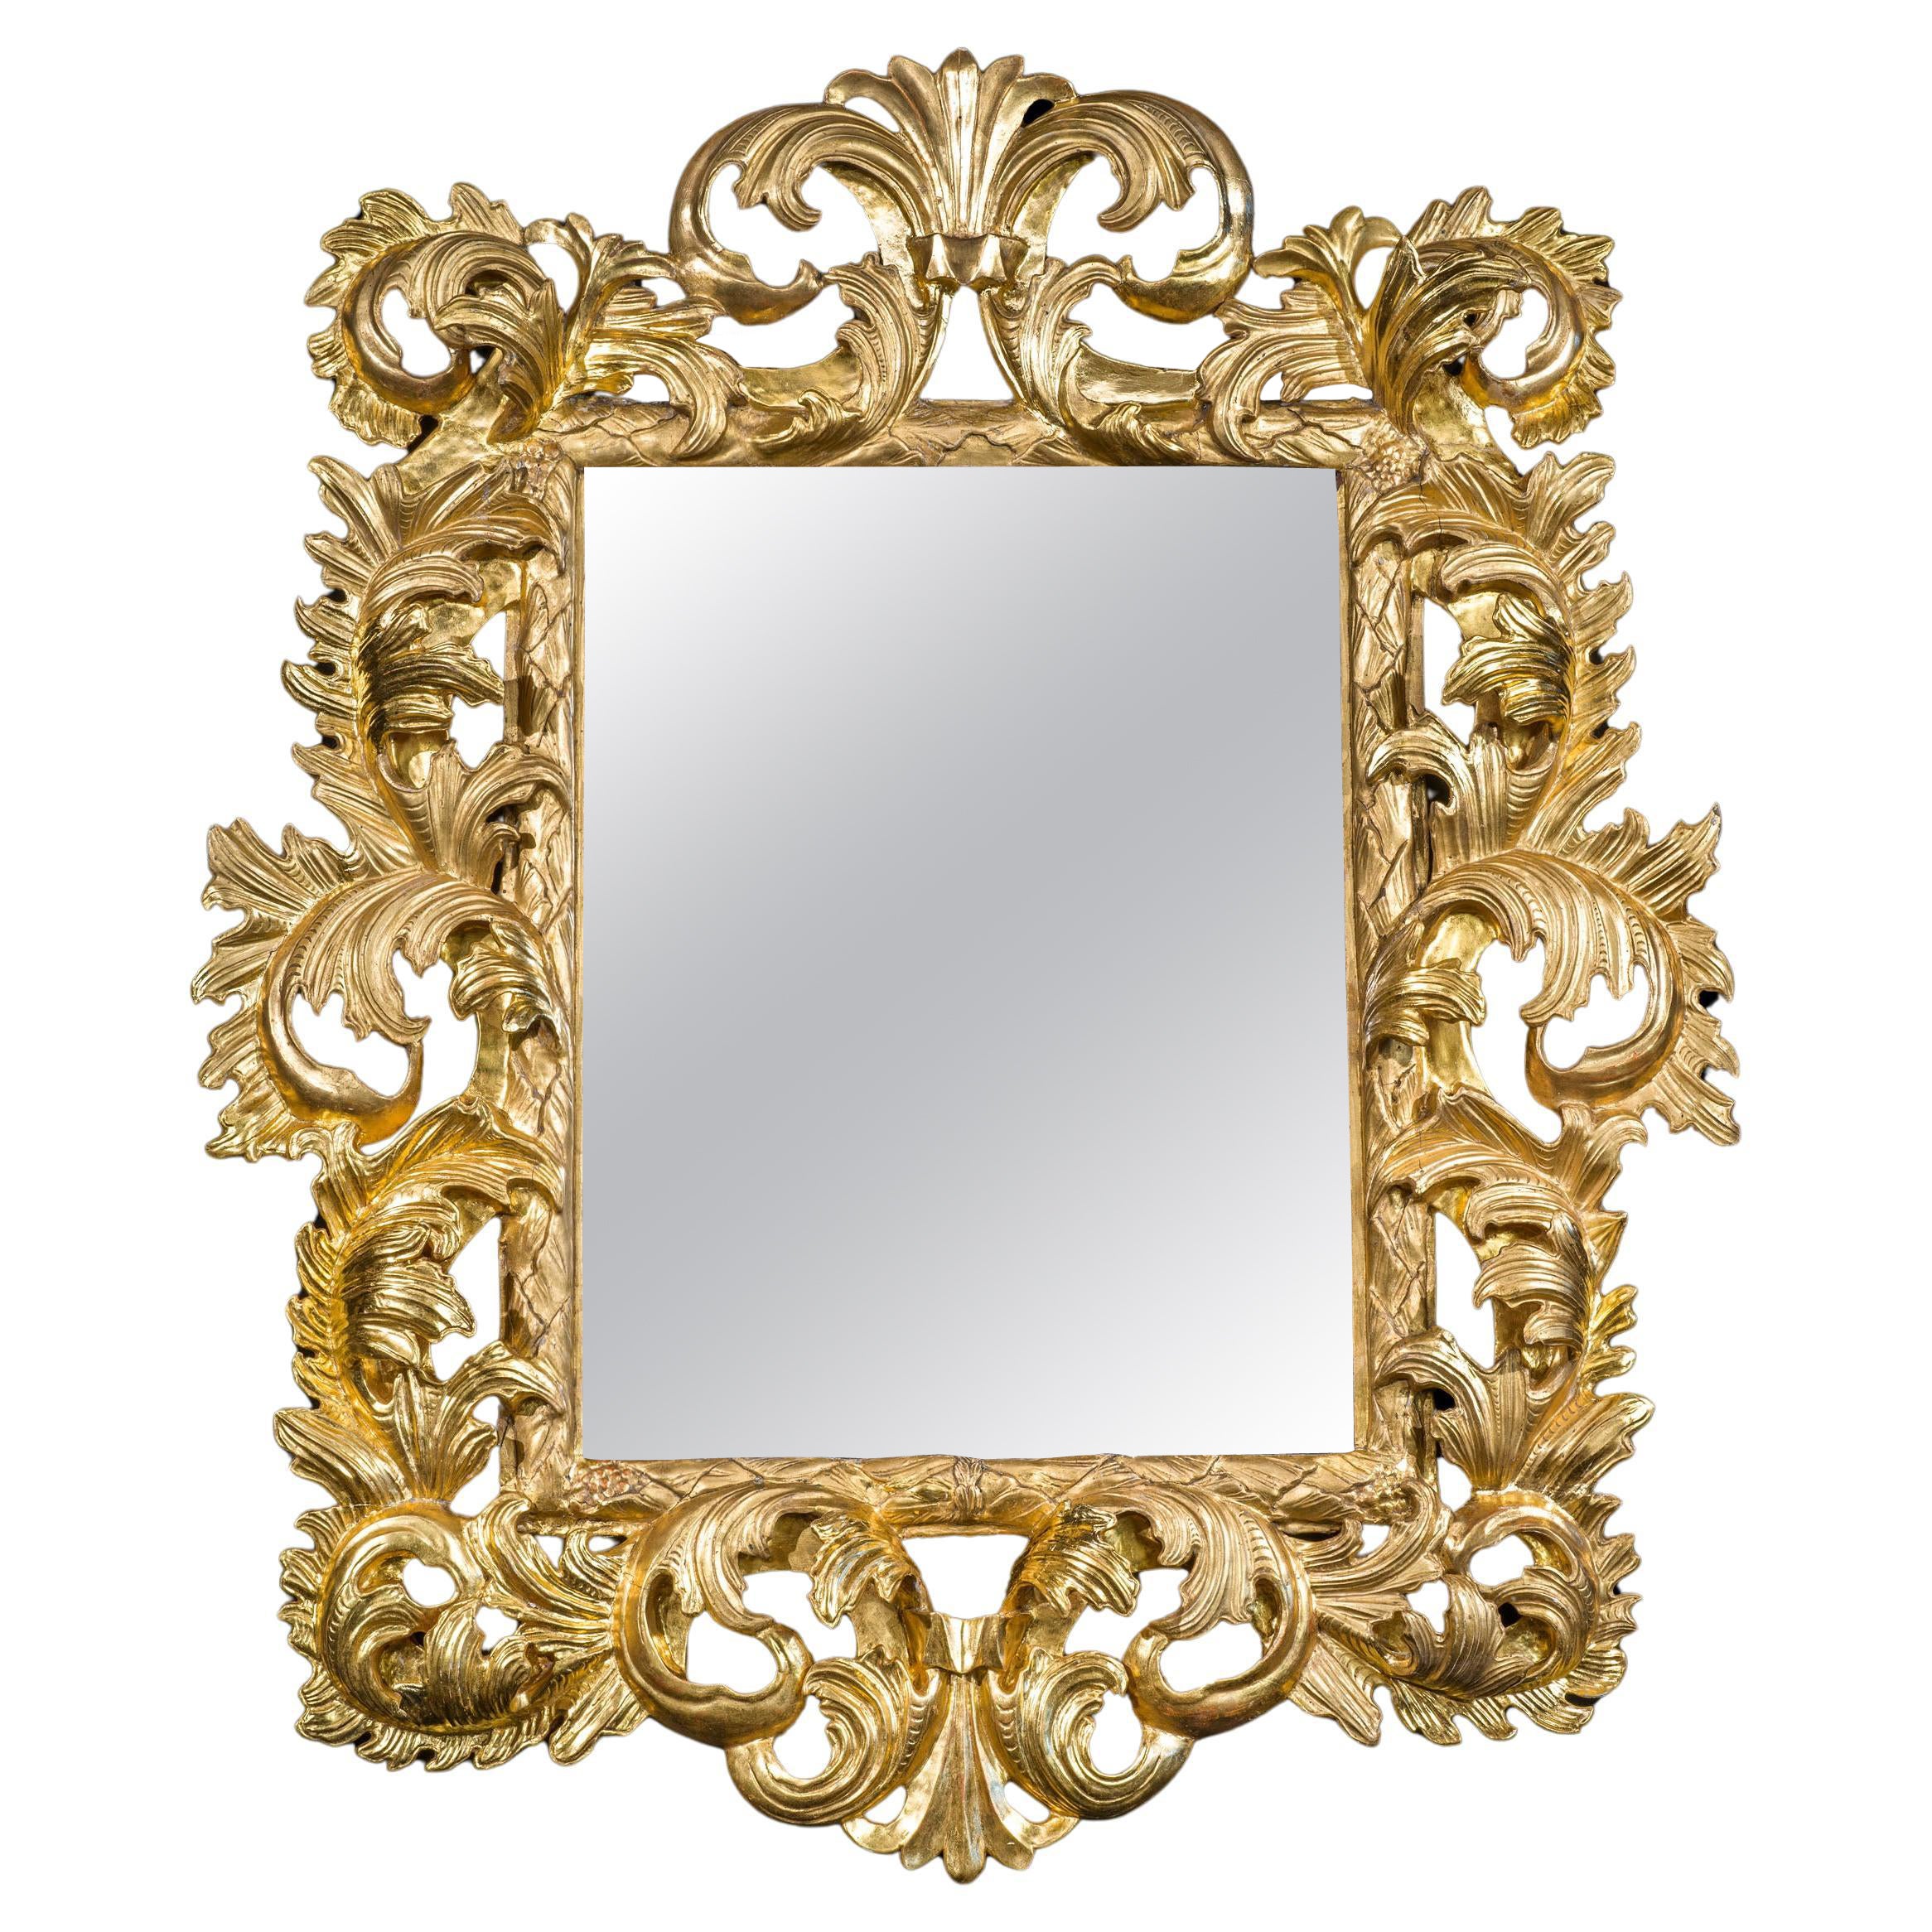 Large Italian Florentine Acanthus Giltwood Wall Mirror For Sale